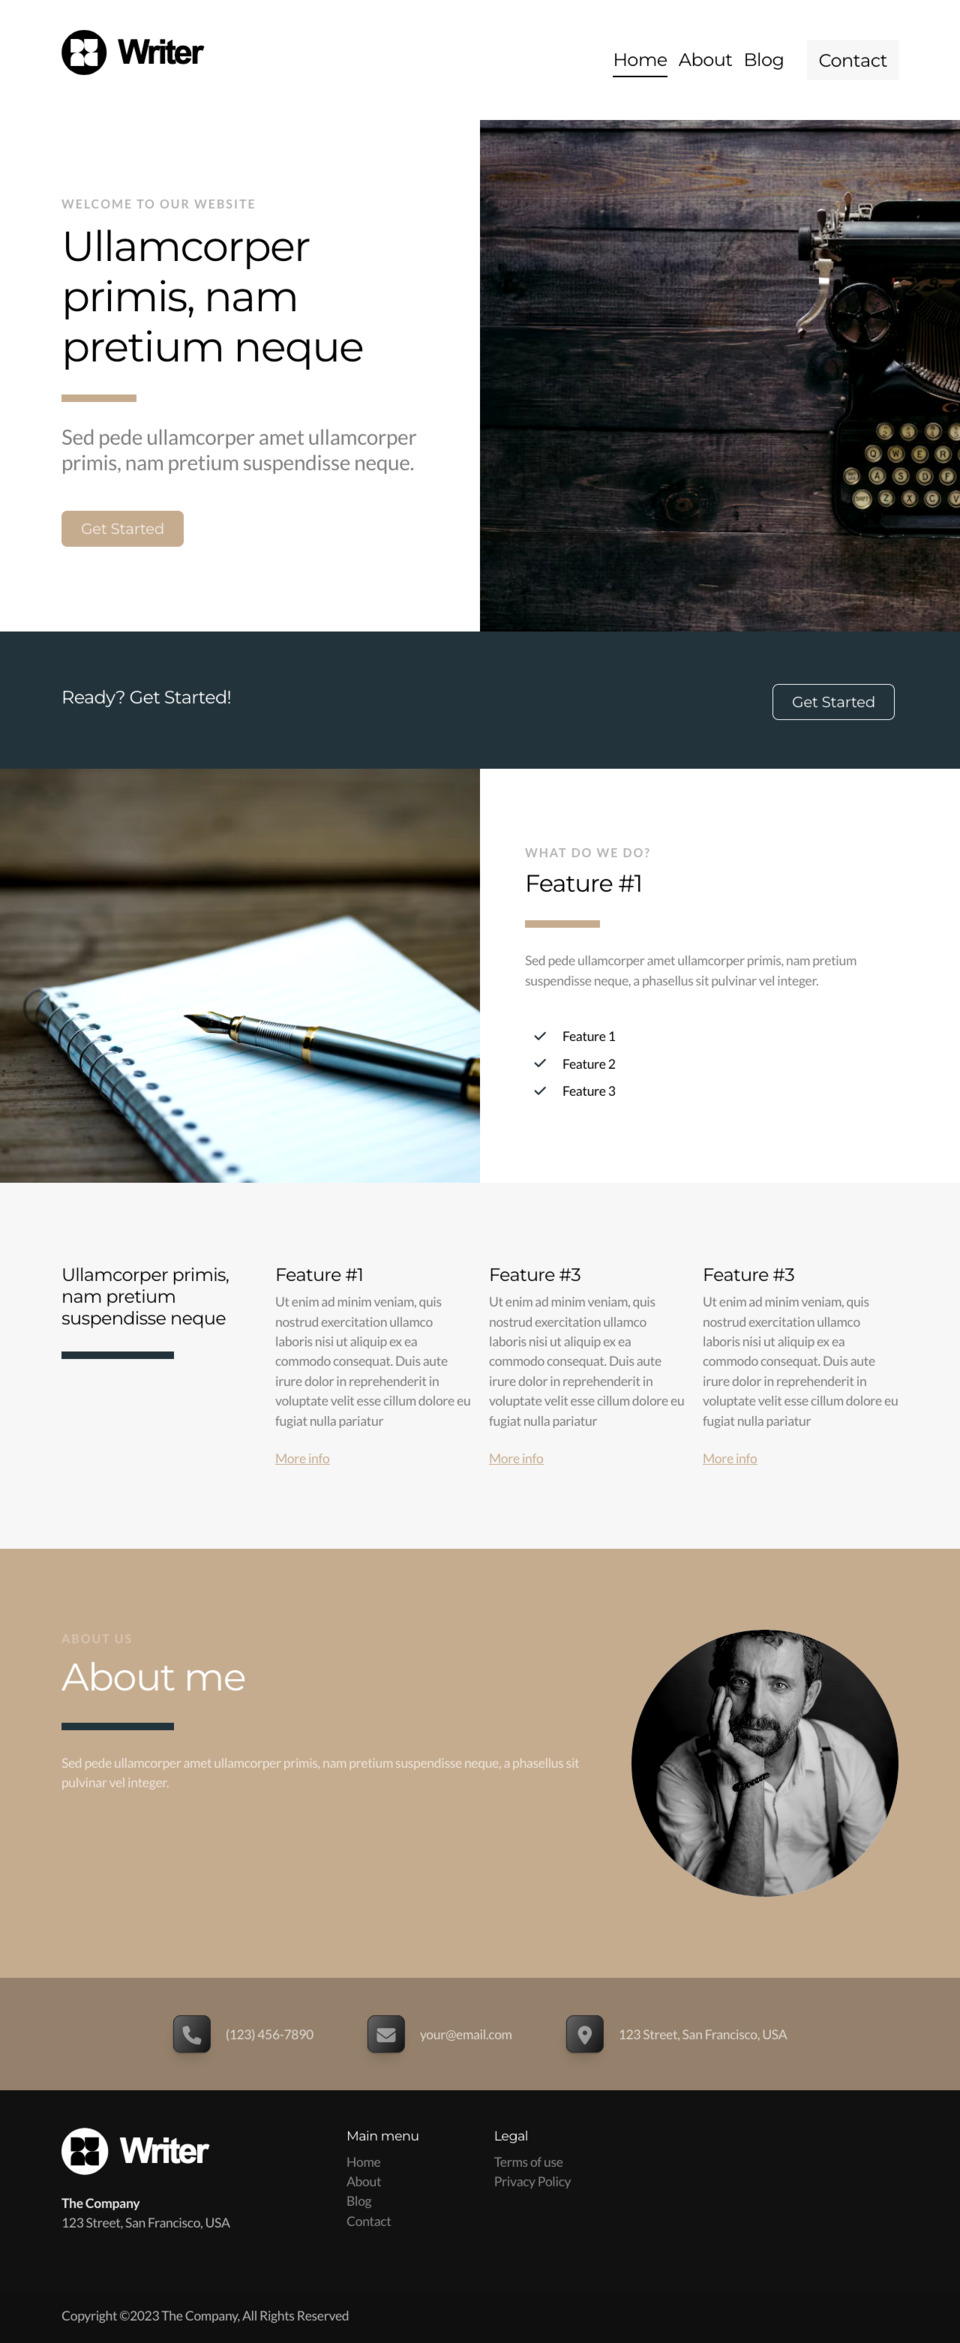 Writer Website Template - Ideal for writers, authors, bloggers, literary agents, writing courses, and more.